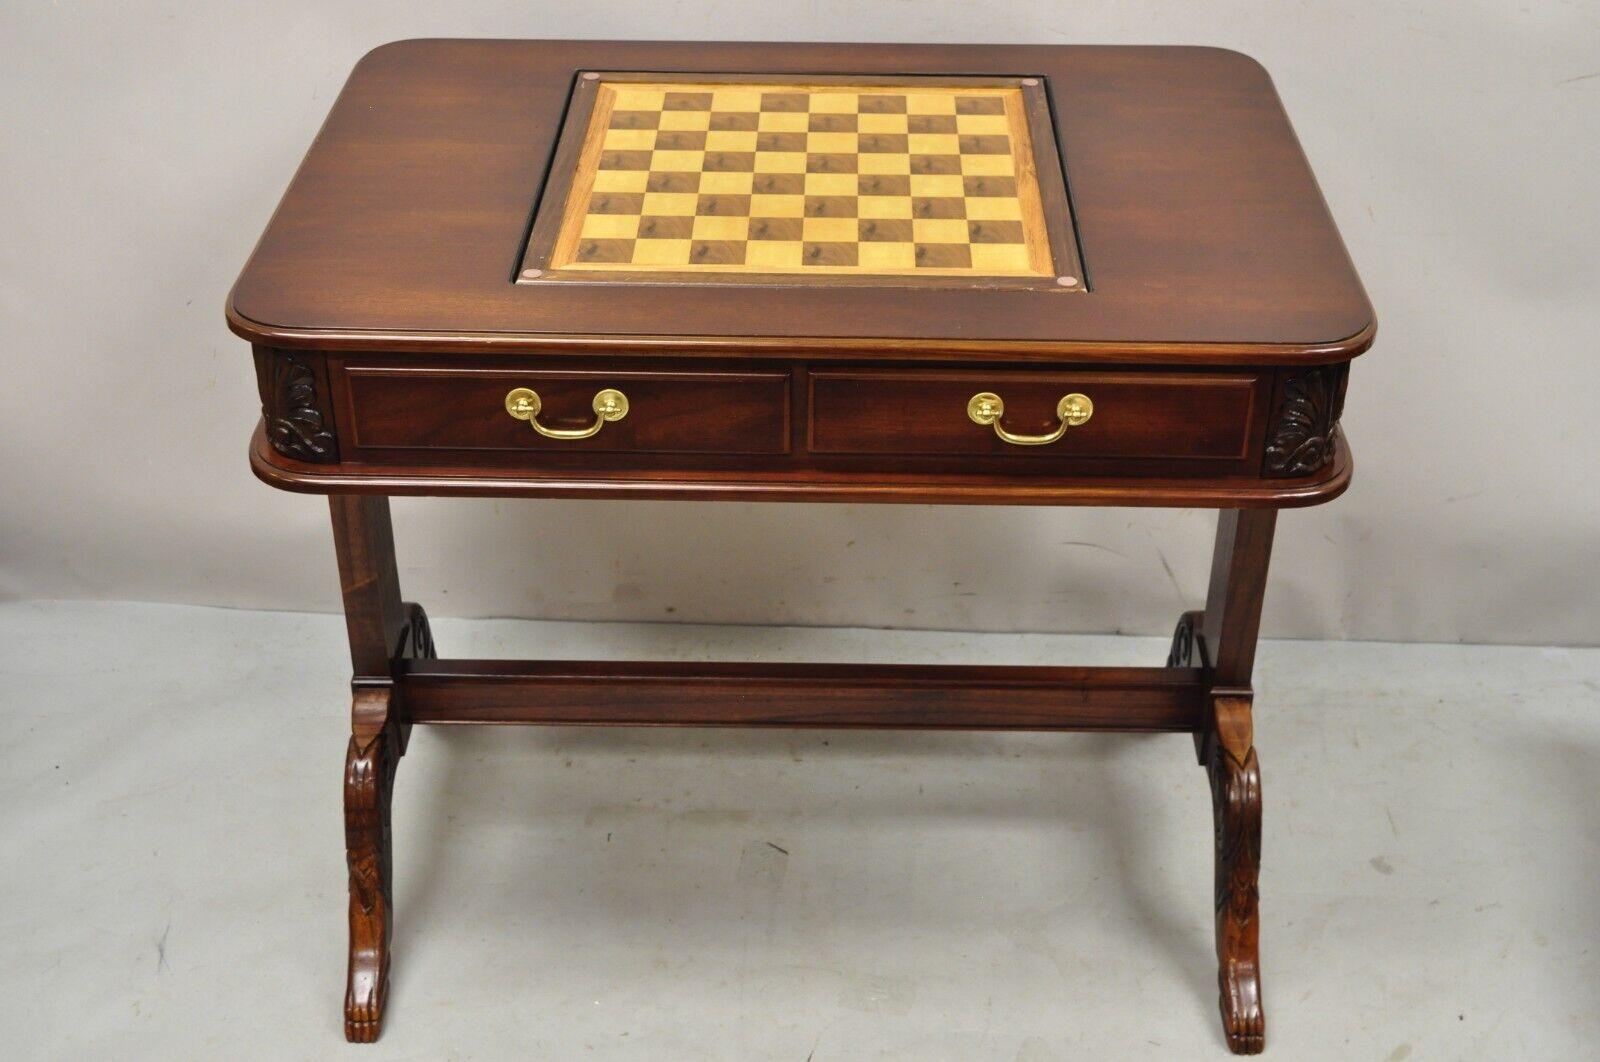 Regency Style Cherry Wood Game Table with Flip Top by Butler Specialty 9